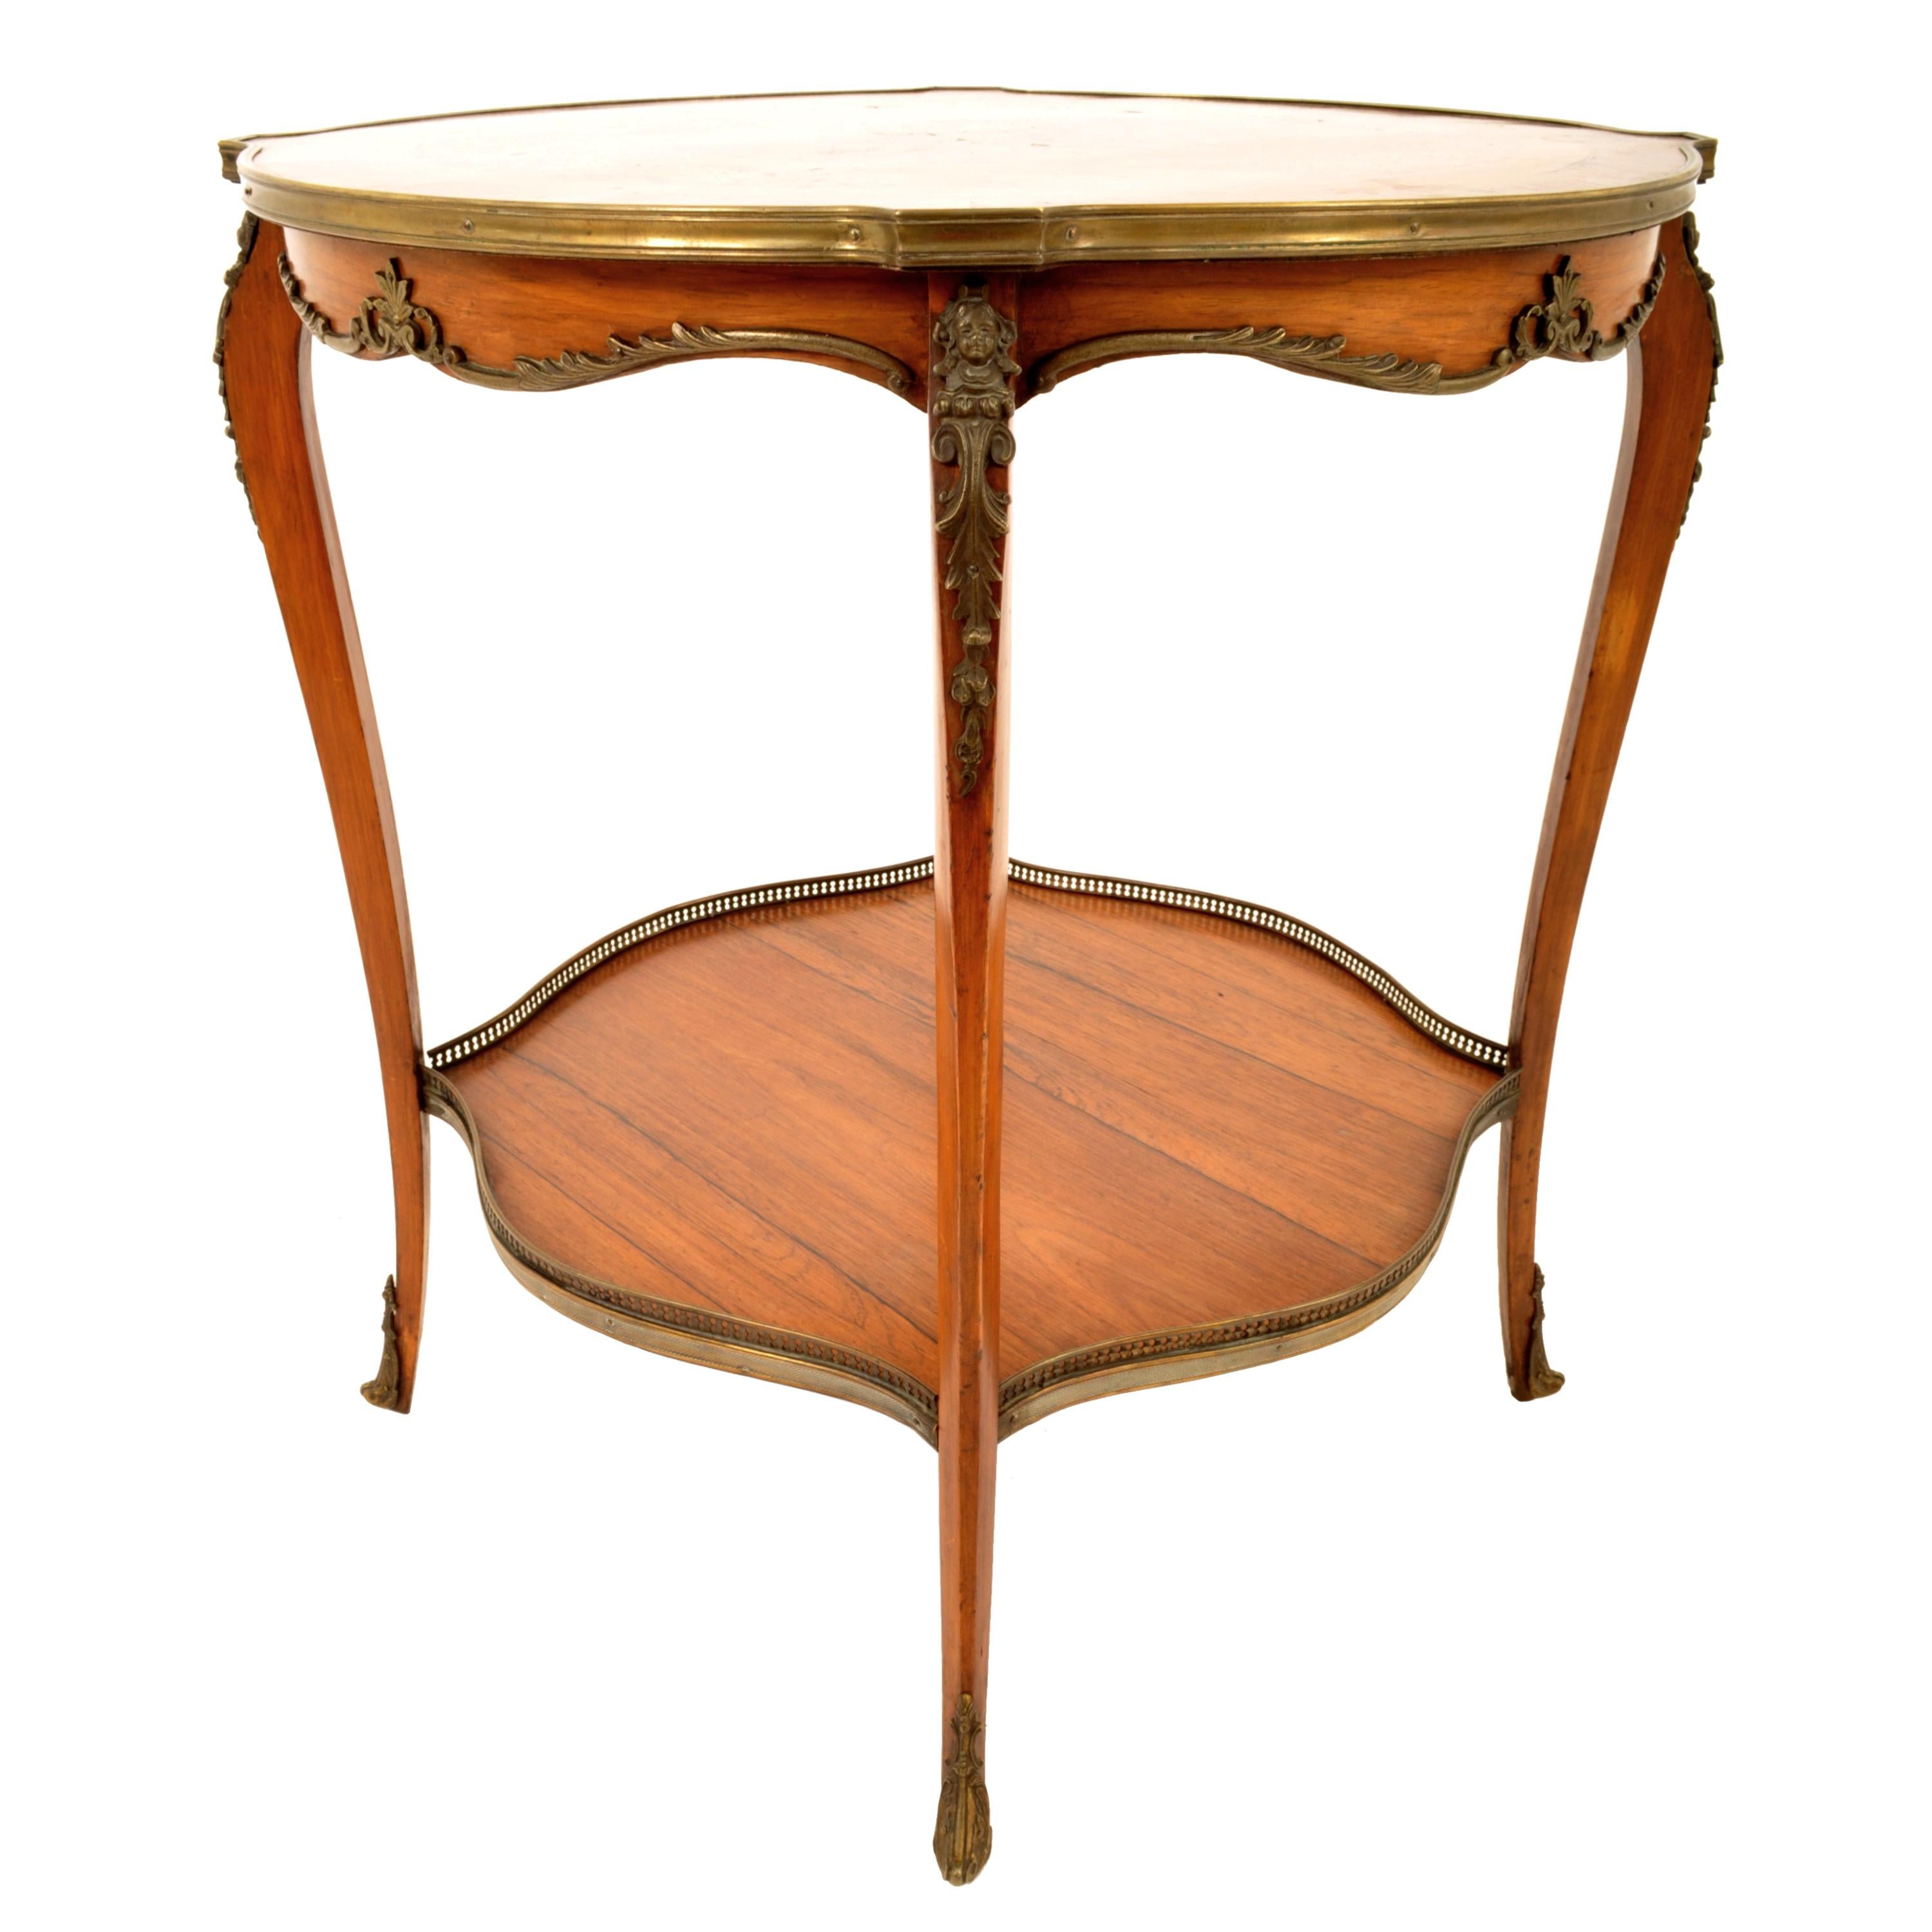 Late 19th Century Antique 19th Century French Louis XV Marquetry & Ormolu Side Center Table 1880